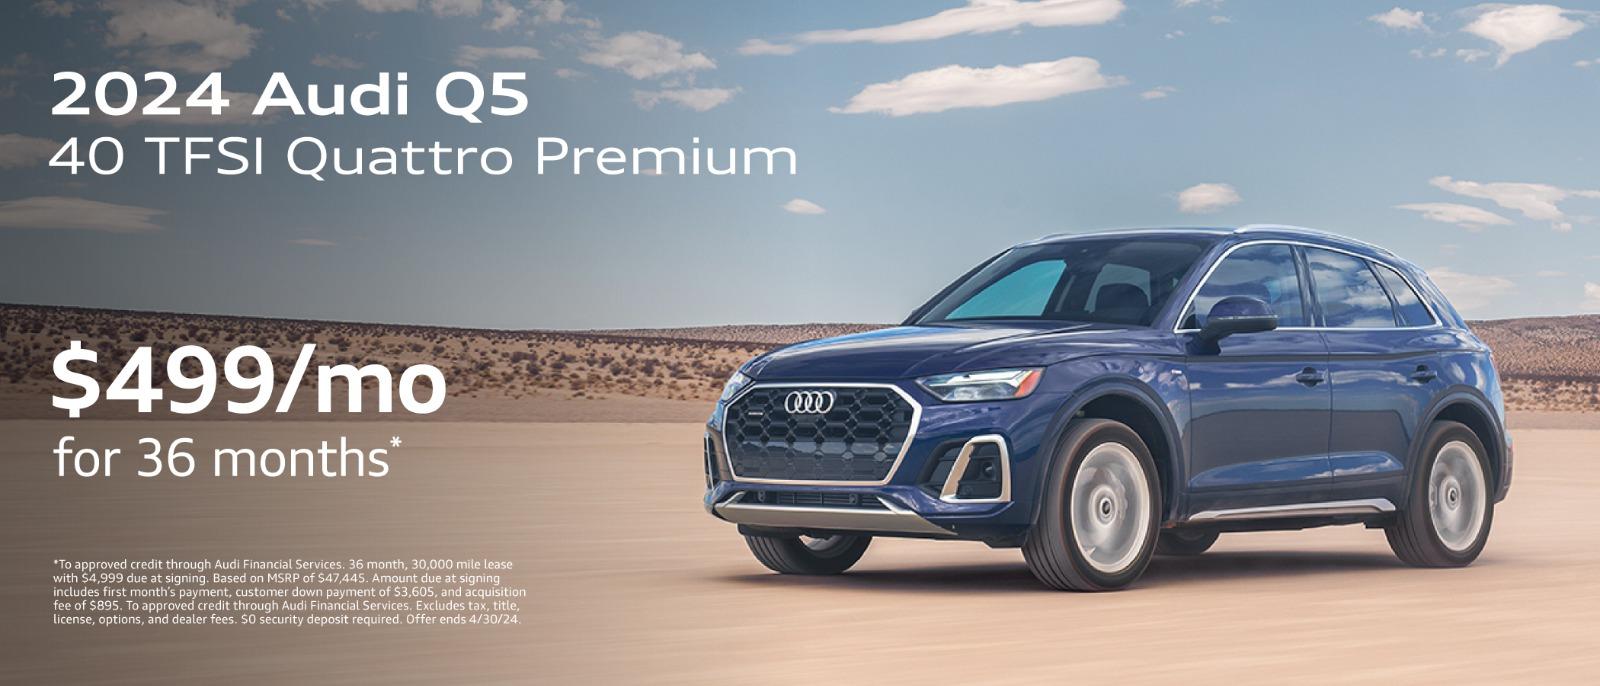 New 2024 Audi Q5 | Lease for $499 per month for 36months